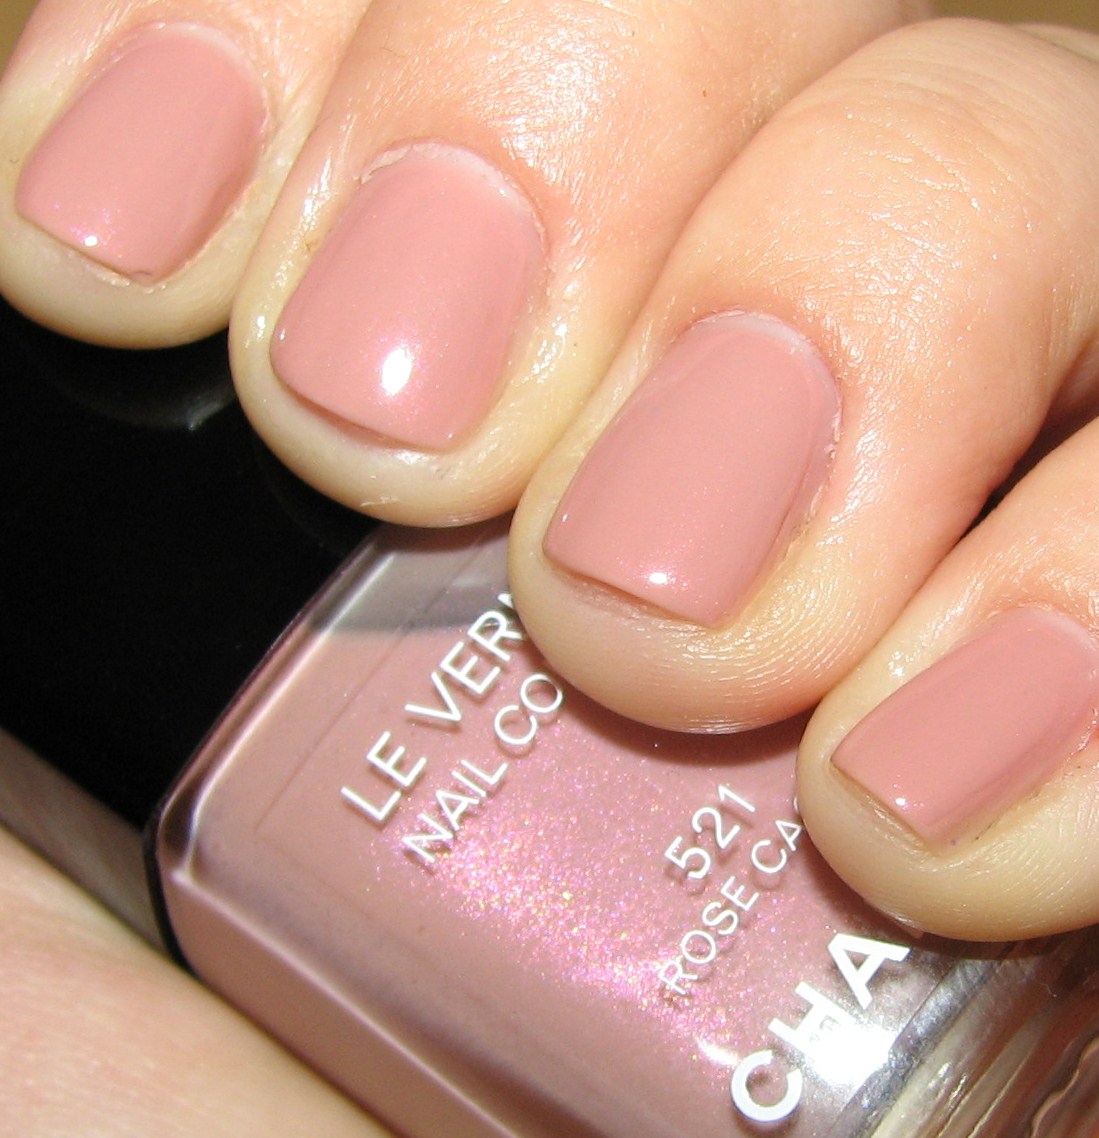 Chanel Rose Cache swatch